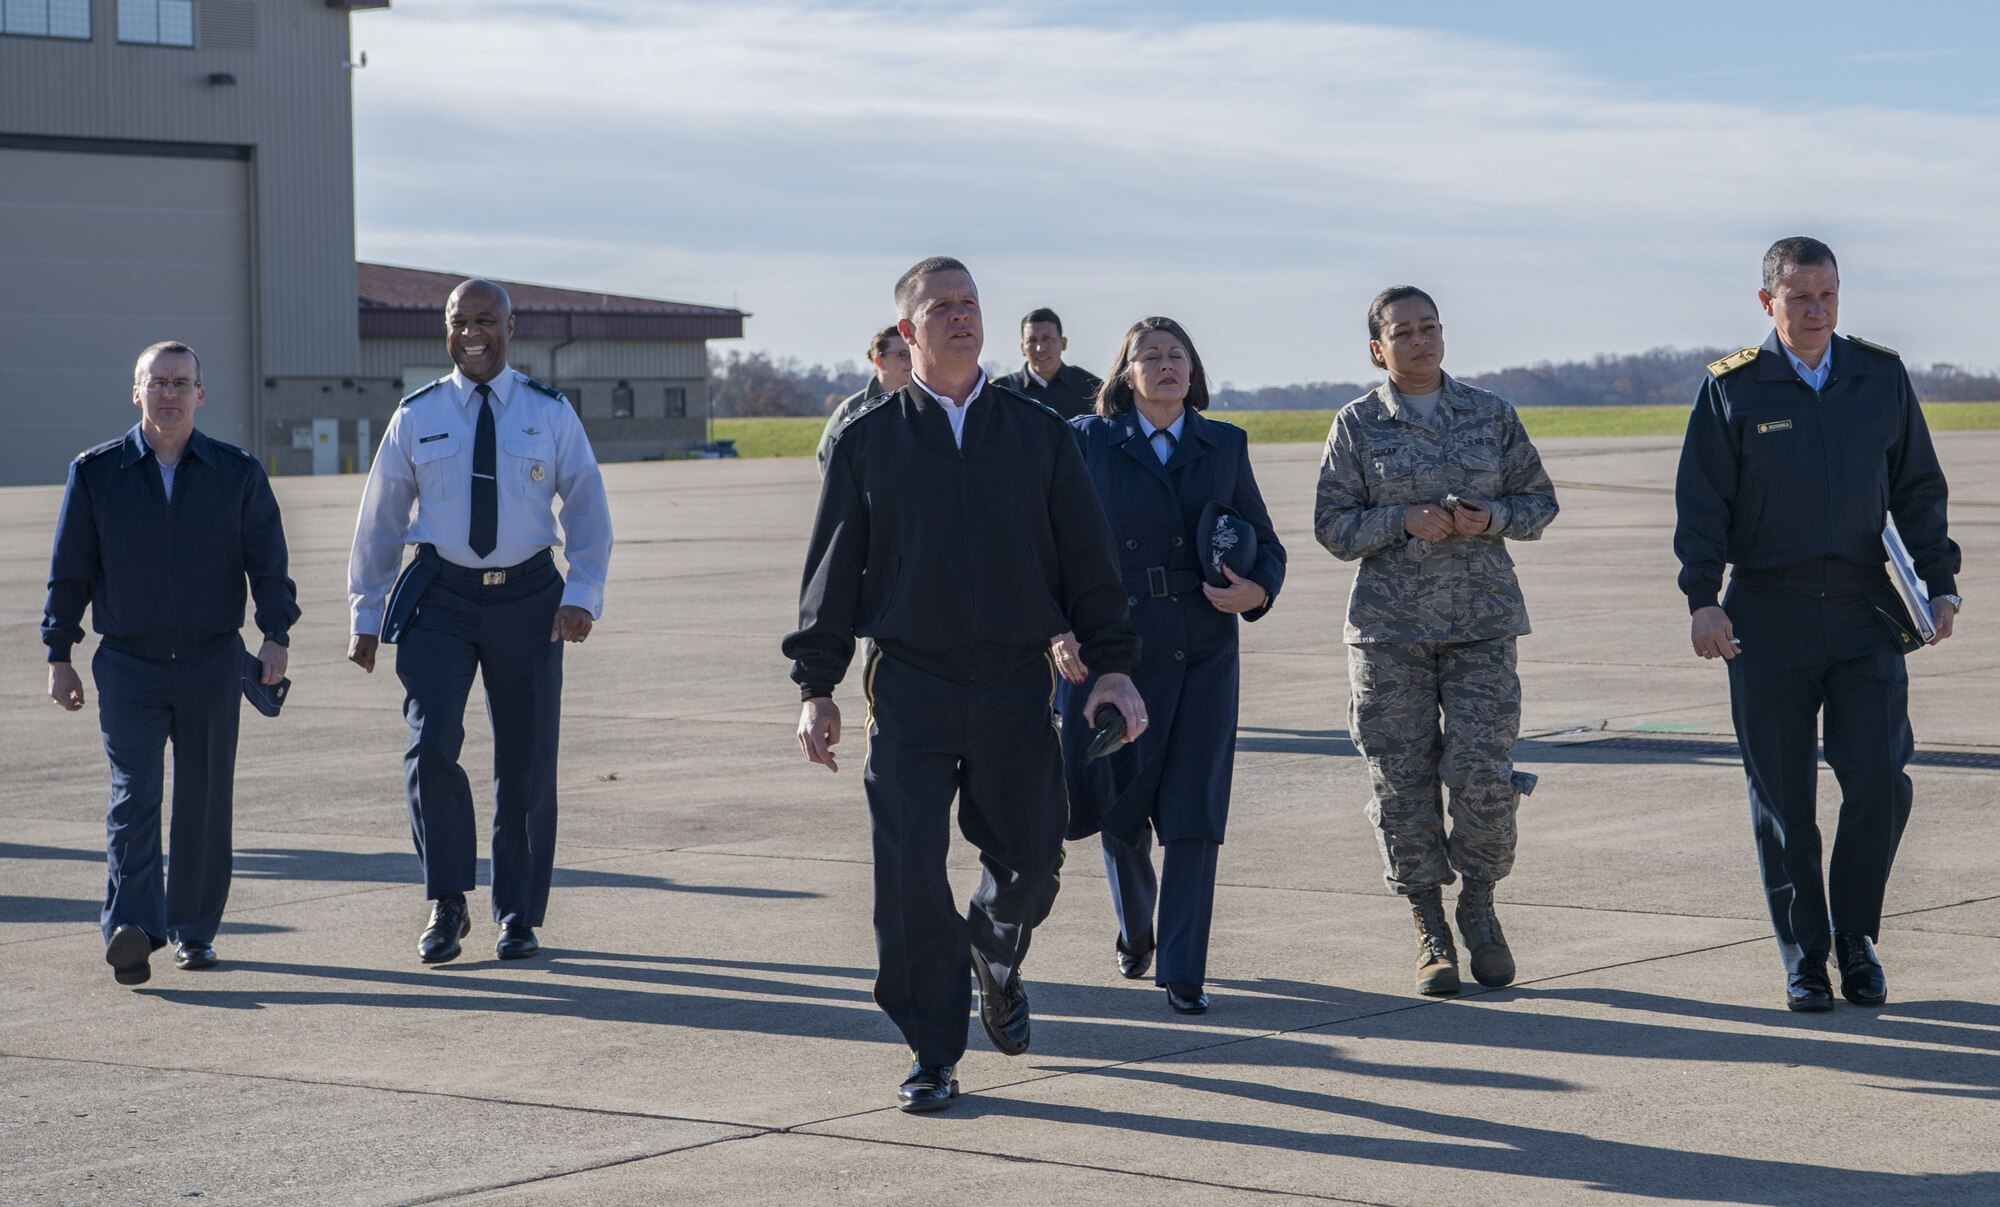 West Virginia National Guard leadership along with Peruvian Air Force Maj. Gen. Gregorio C. Mendiola, Assistant Defense and Air Attaché for the Embassy of Peru, walk out to a C-130H Nov. 21, 2017 at McLaughlin Air National Guard Base, Charleston, W.Va. Mendiola visited the 130th Airlift Wing to see first hand the domestic response capabilities of Air National Guard assets at the wing including the C-130H and aeromedical evacuation mission. (U.S. Air National Guard Photo by Airman Caleb Vance)